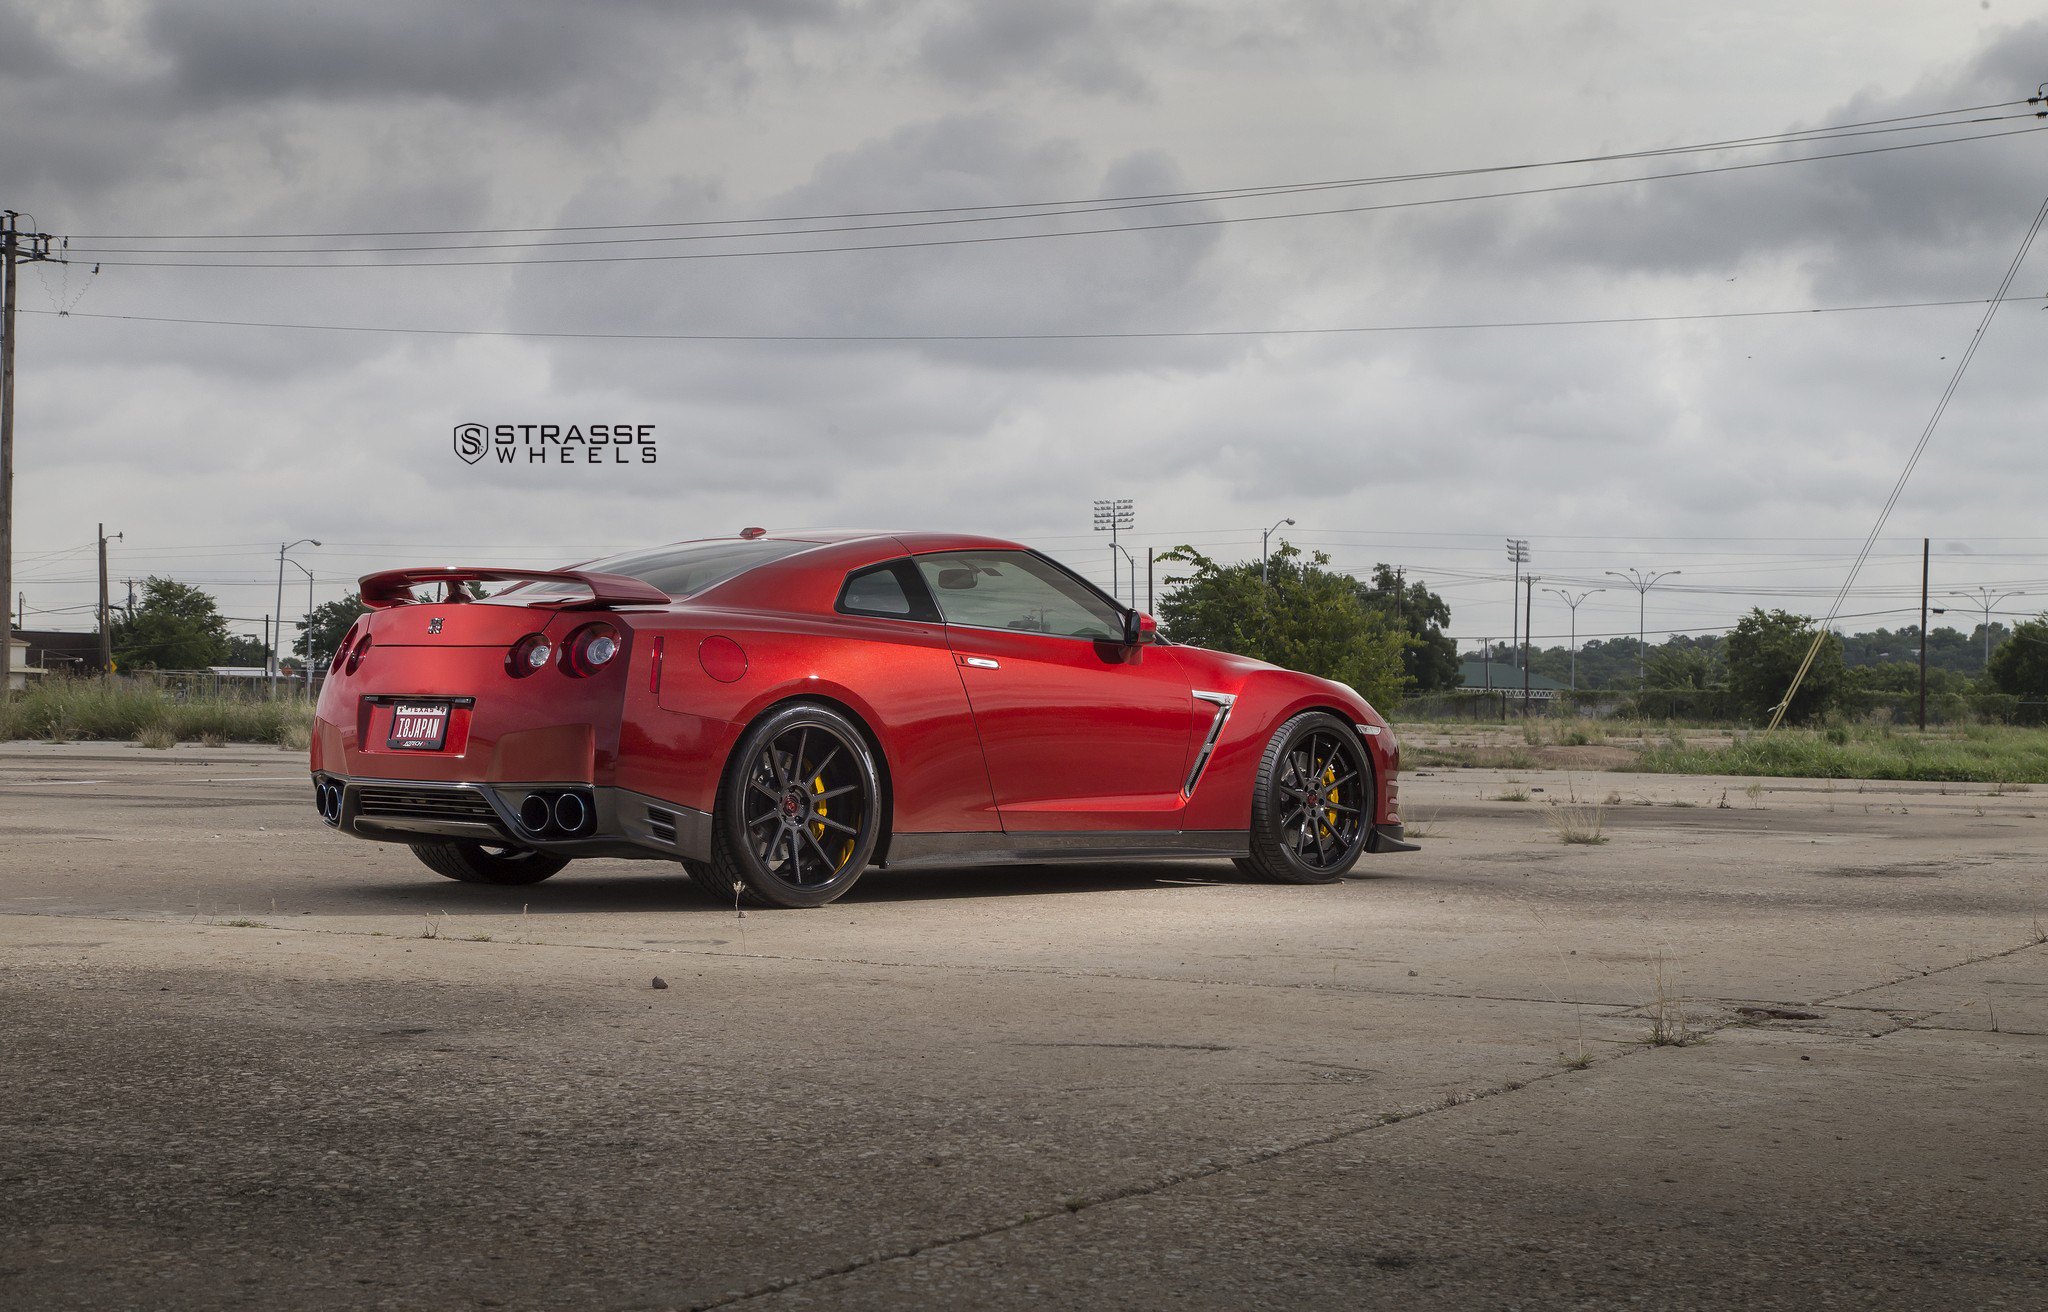 Rear Diffuser with Dual Exhaust Tips on Red Nissan GT-R - Photo by Strasse Forged